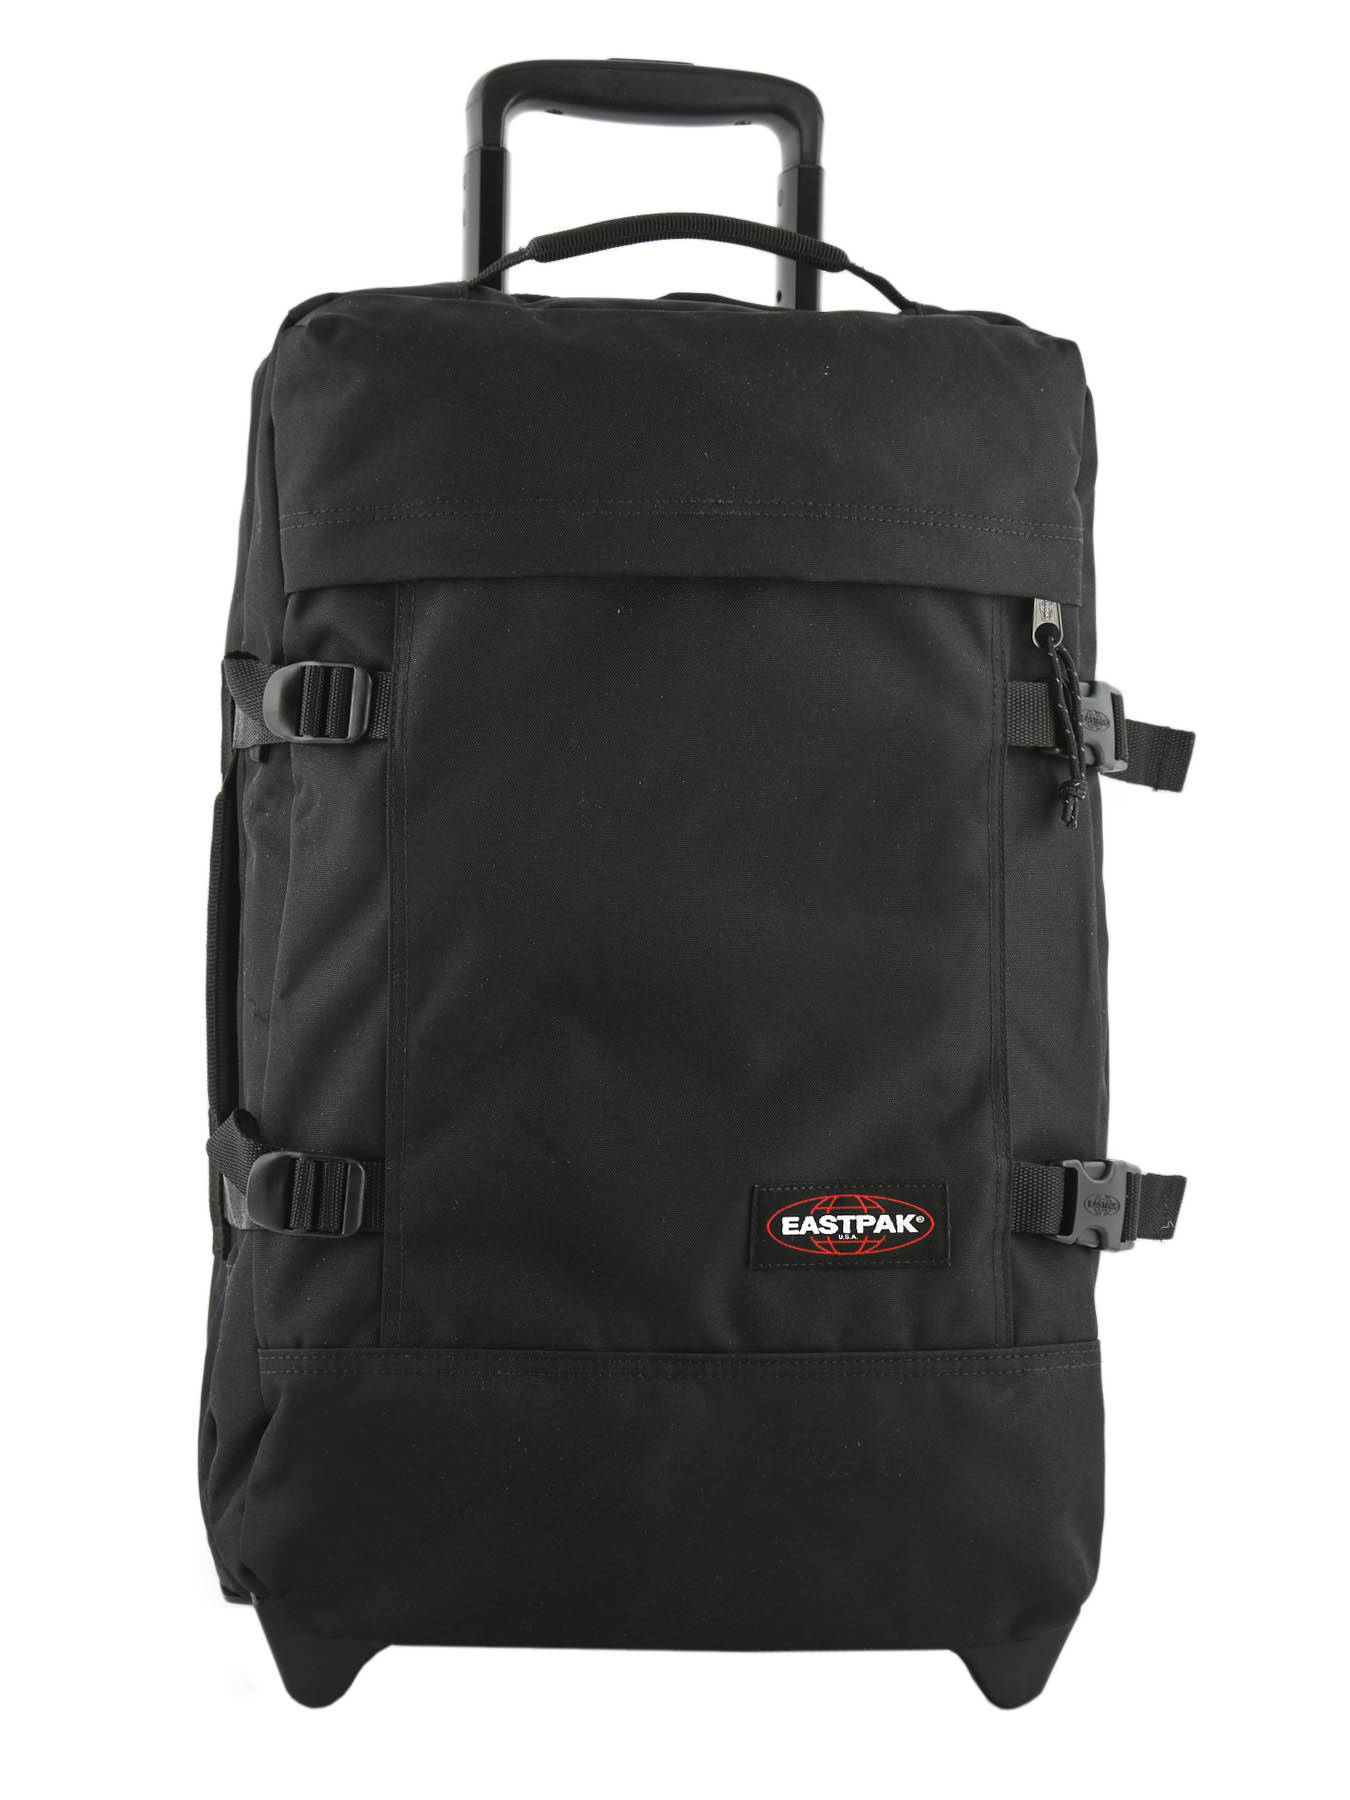 Eastpak Carry-on-suitcase STRAPVERZ.S - best prices